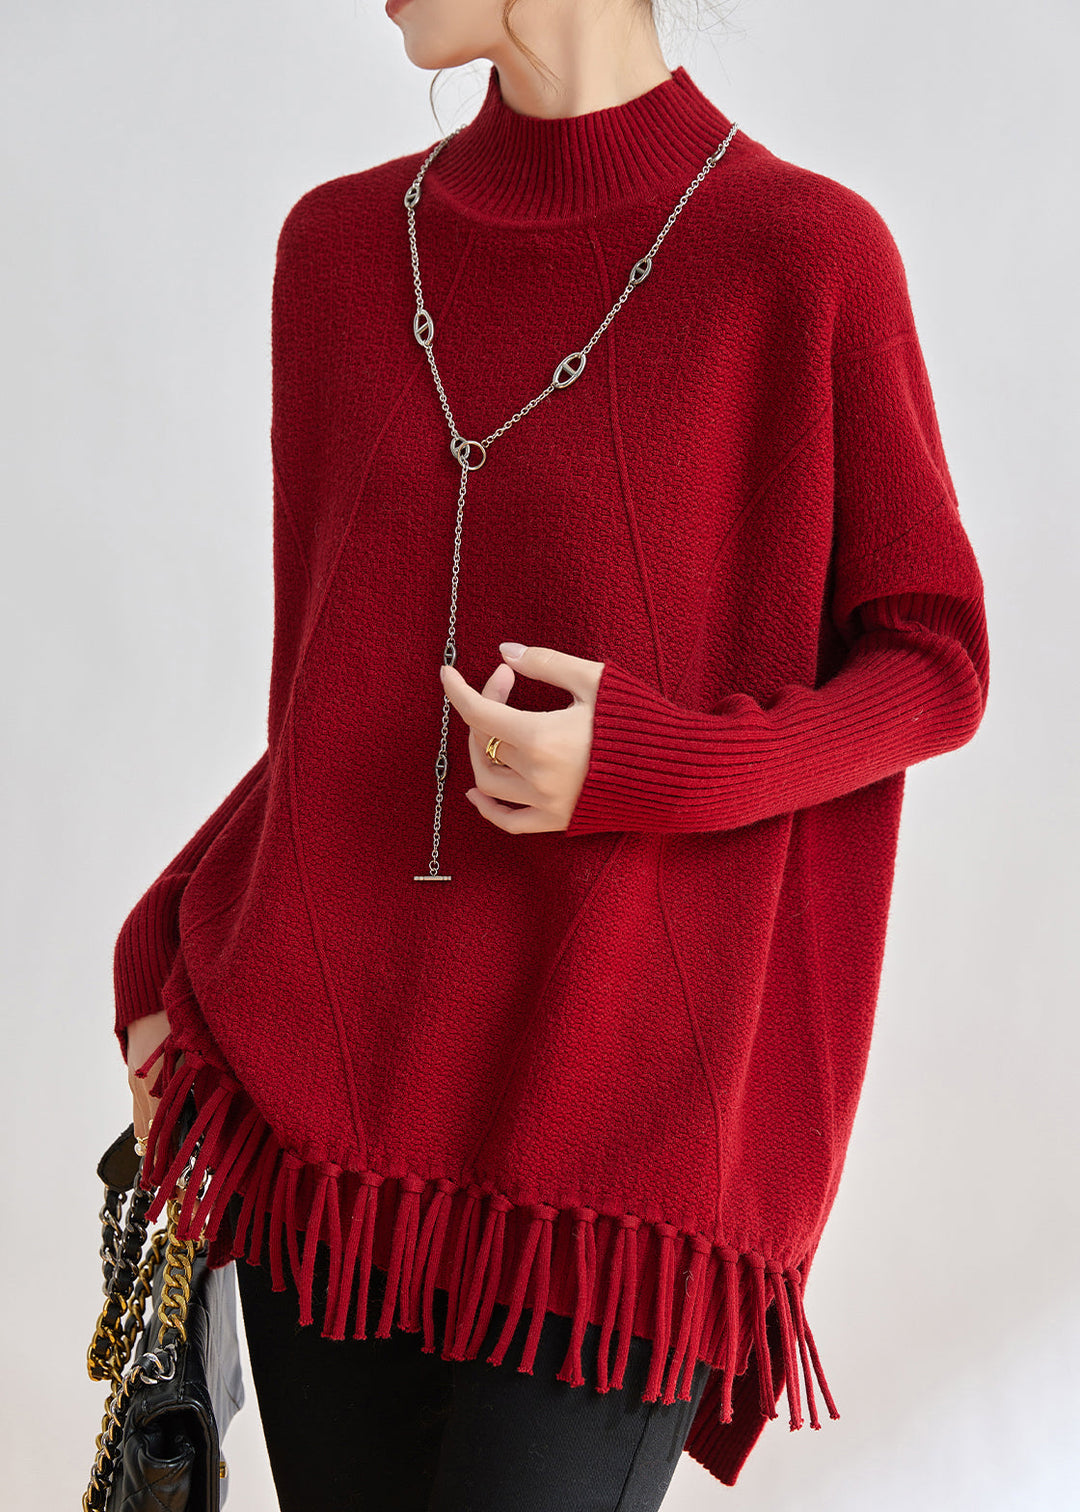 Style Loose Coffee Tasseled Thick Patchwork Knit Sweaters Winter